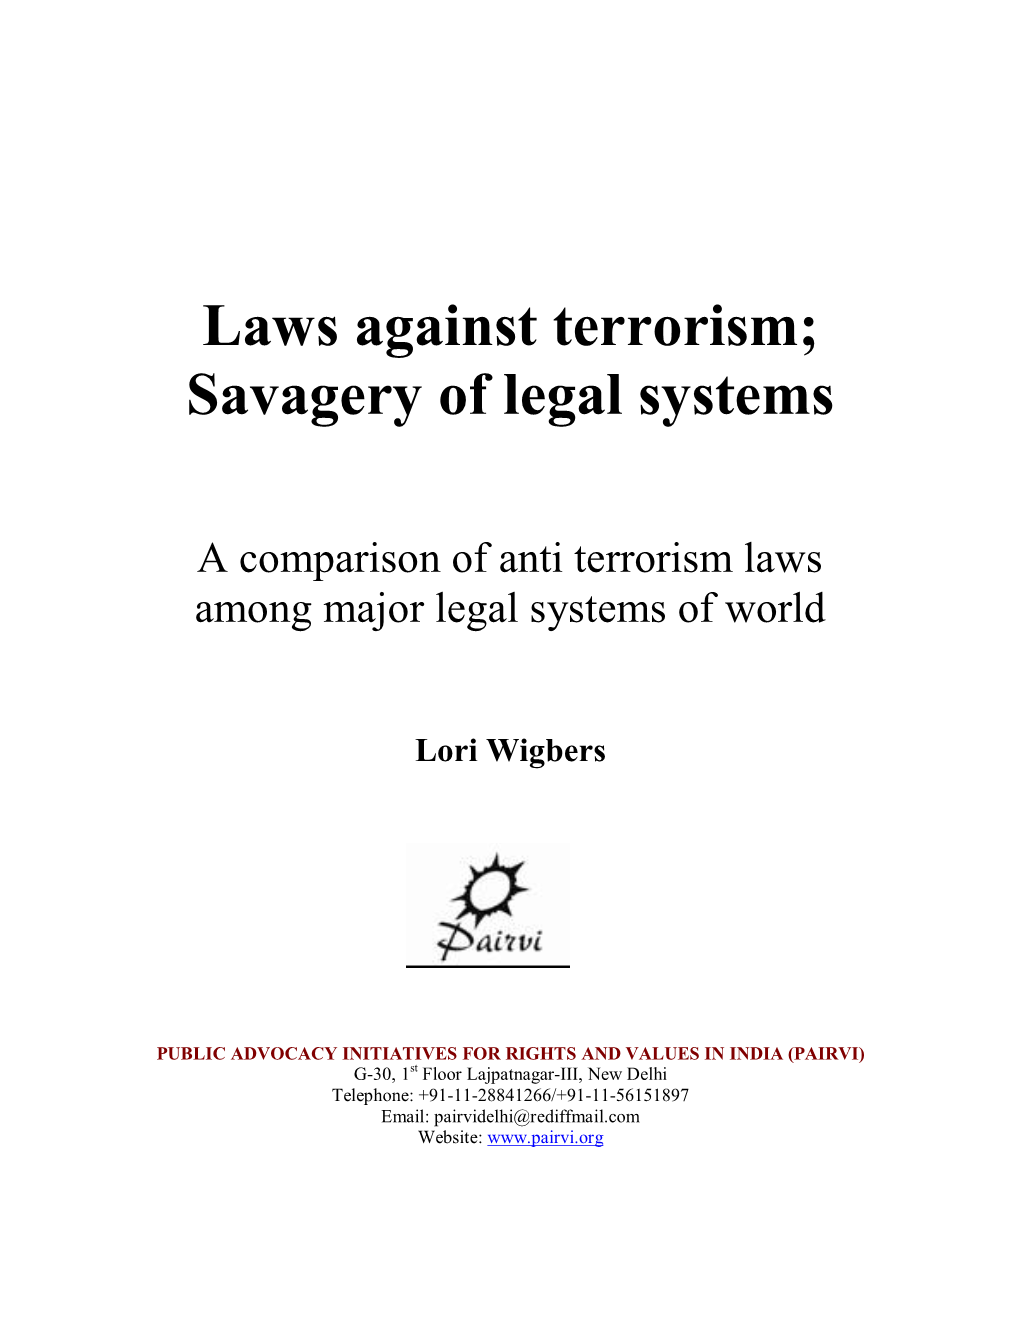 Laws Against Terrorism; Savagery of Legal Systems